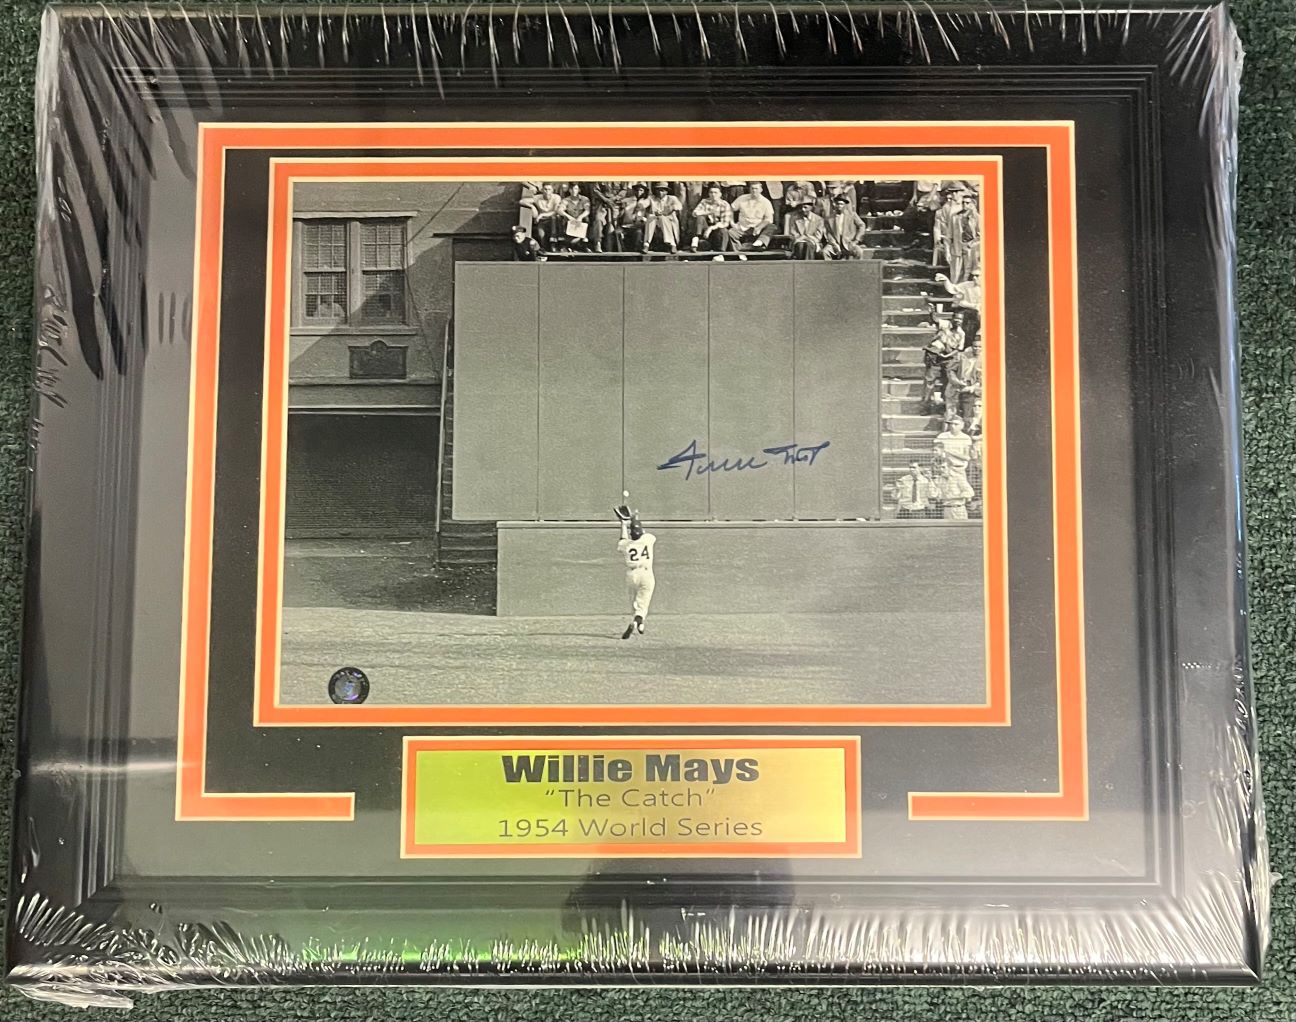 Willie Mays "The Catch" Signed Photo